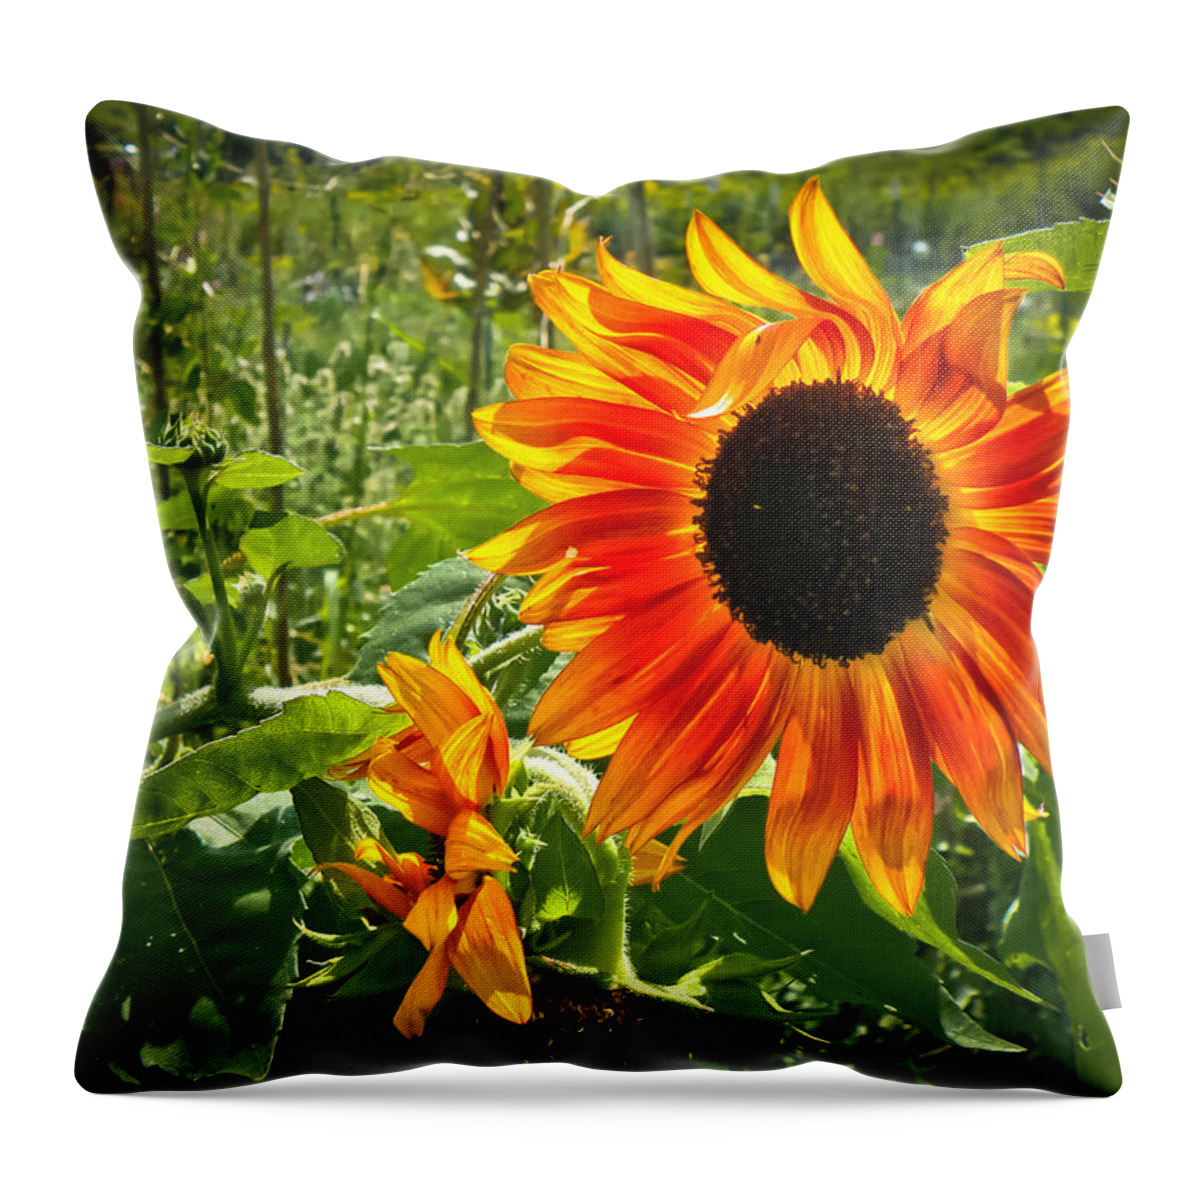 Flower Throw Pillow featuring the photograph Noontime Sunflowers by Jiayin Ma